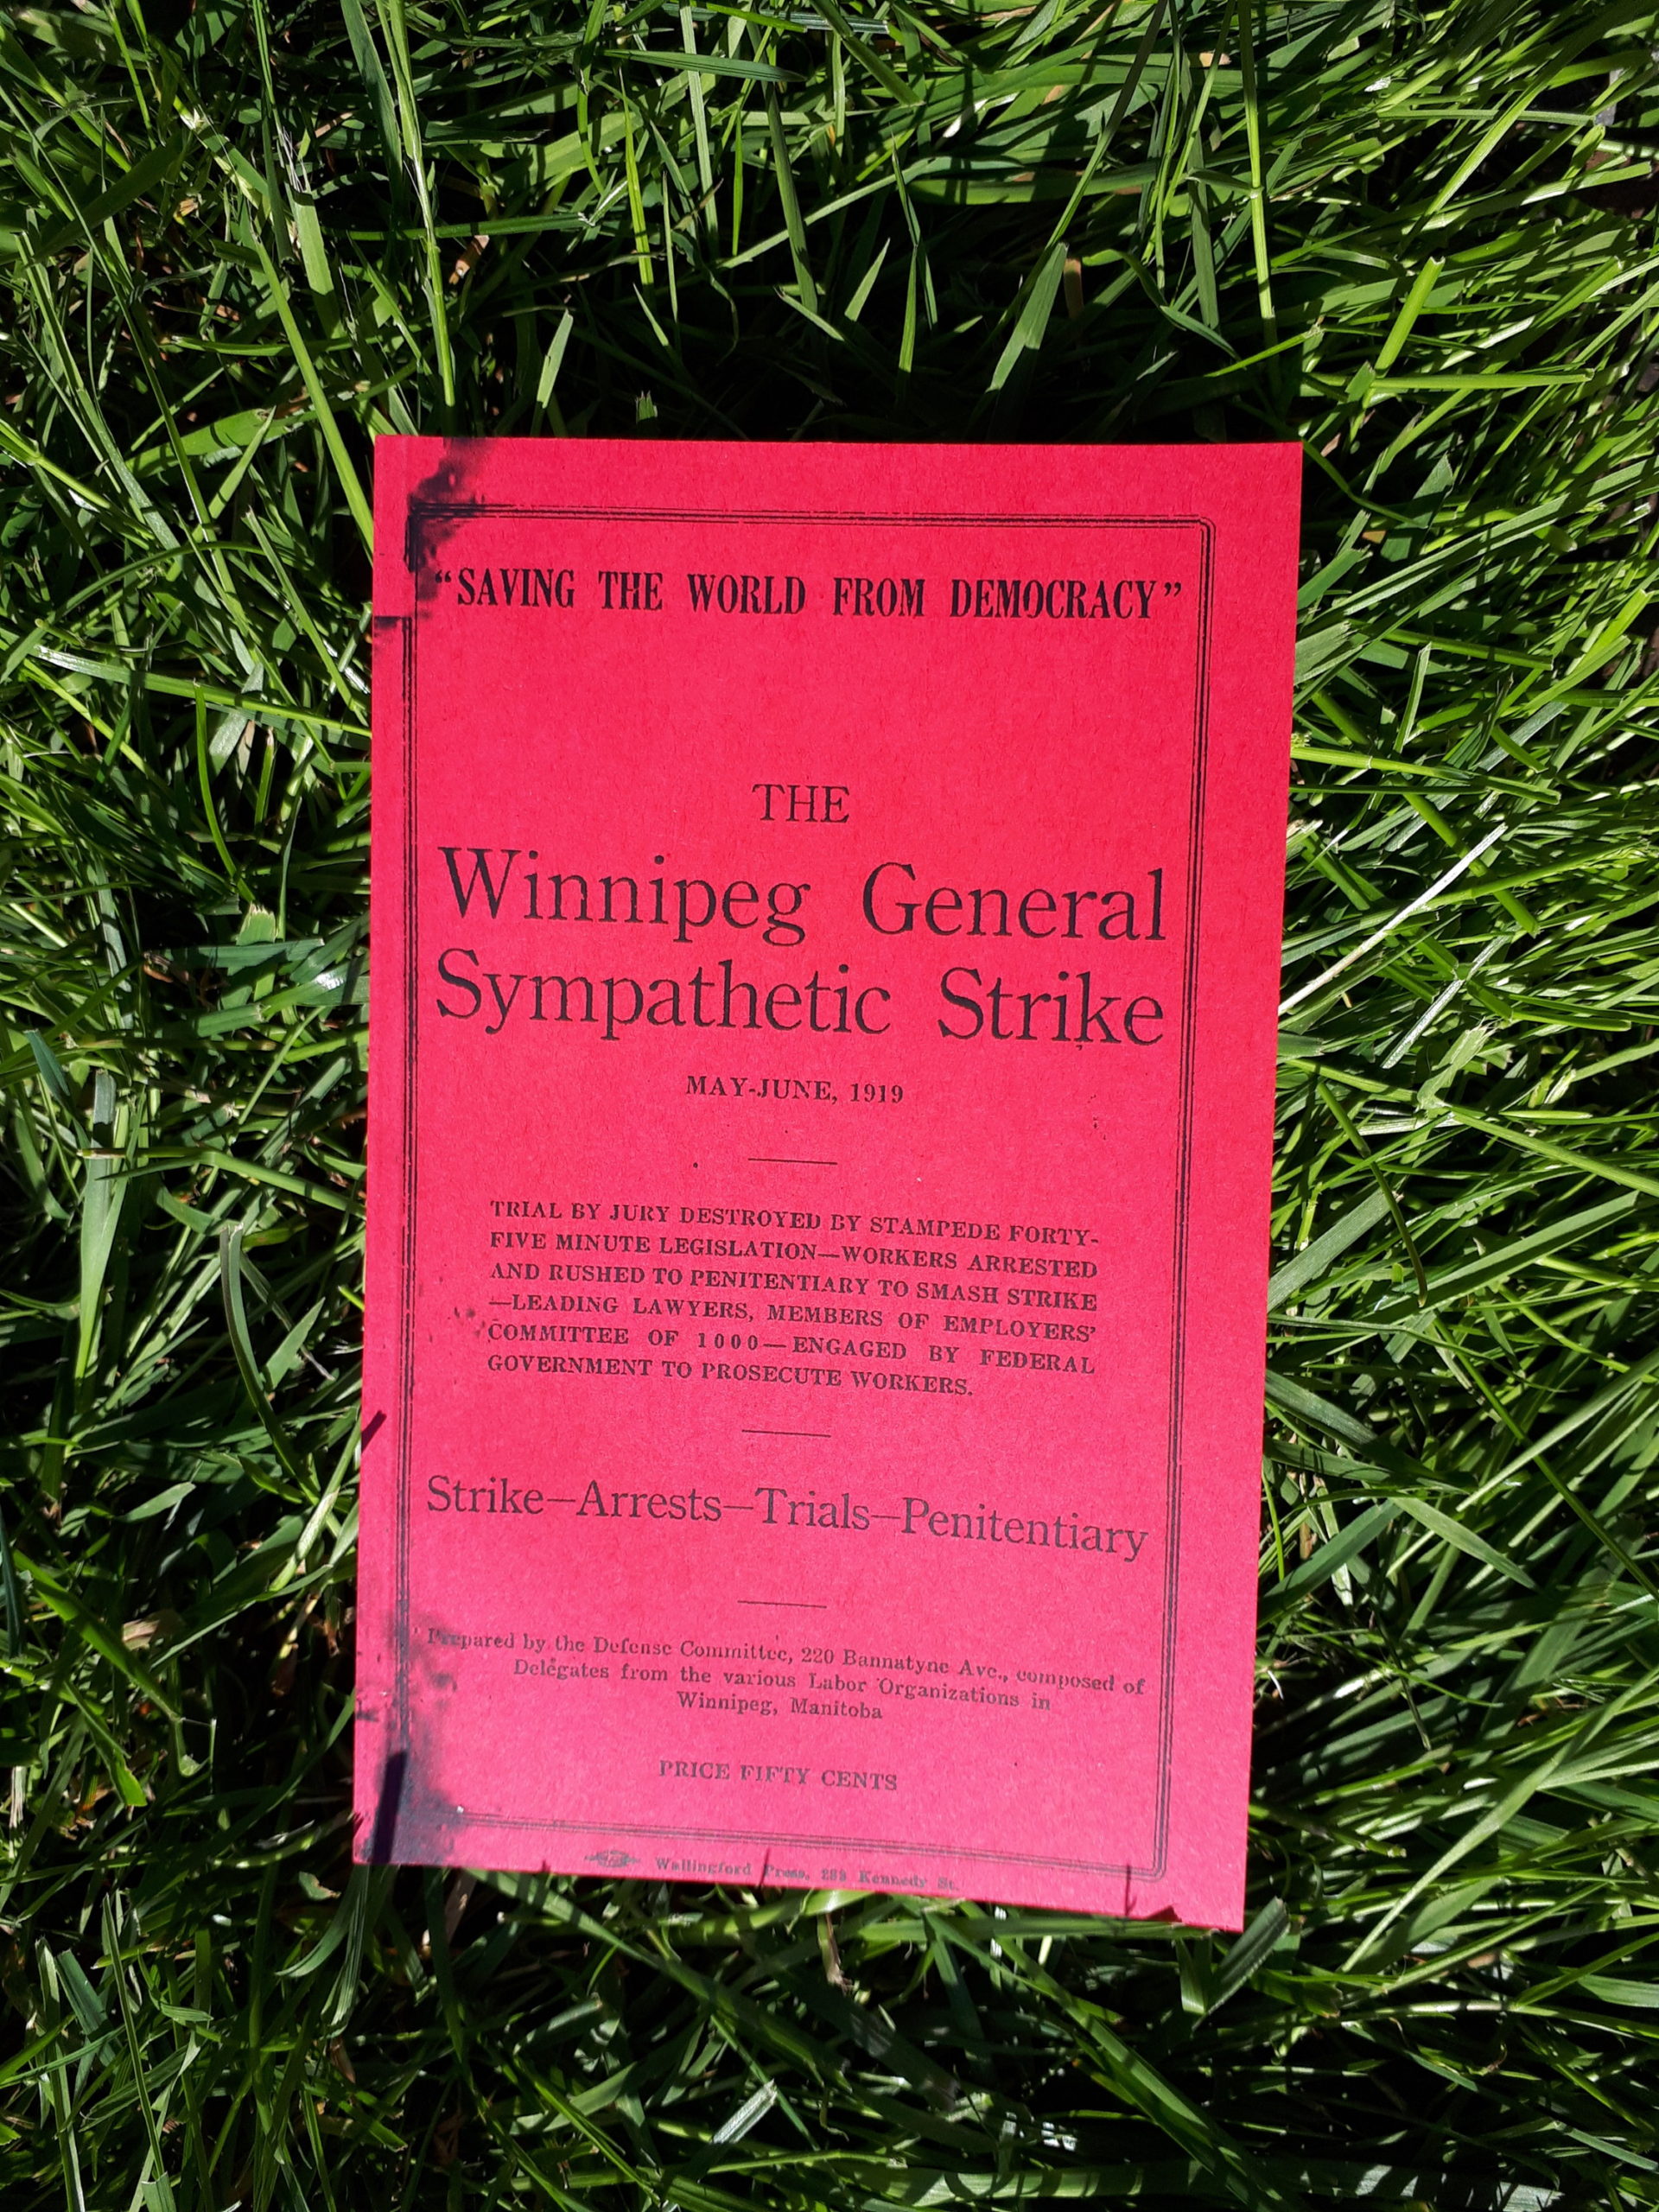 A book with bright read covers laying on a surface of vibrant green grass. The cover reads in part "'Saving the World from Democracy', The Winnipeg General Sympathetic Strike"